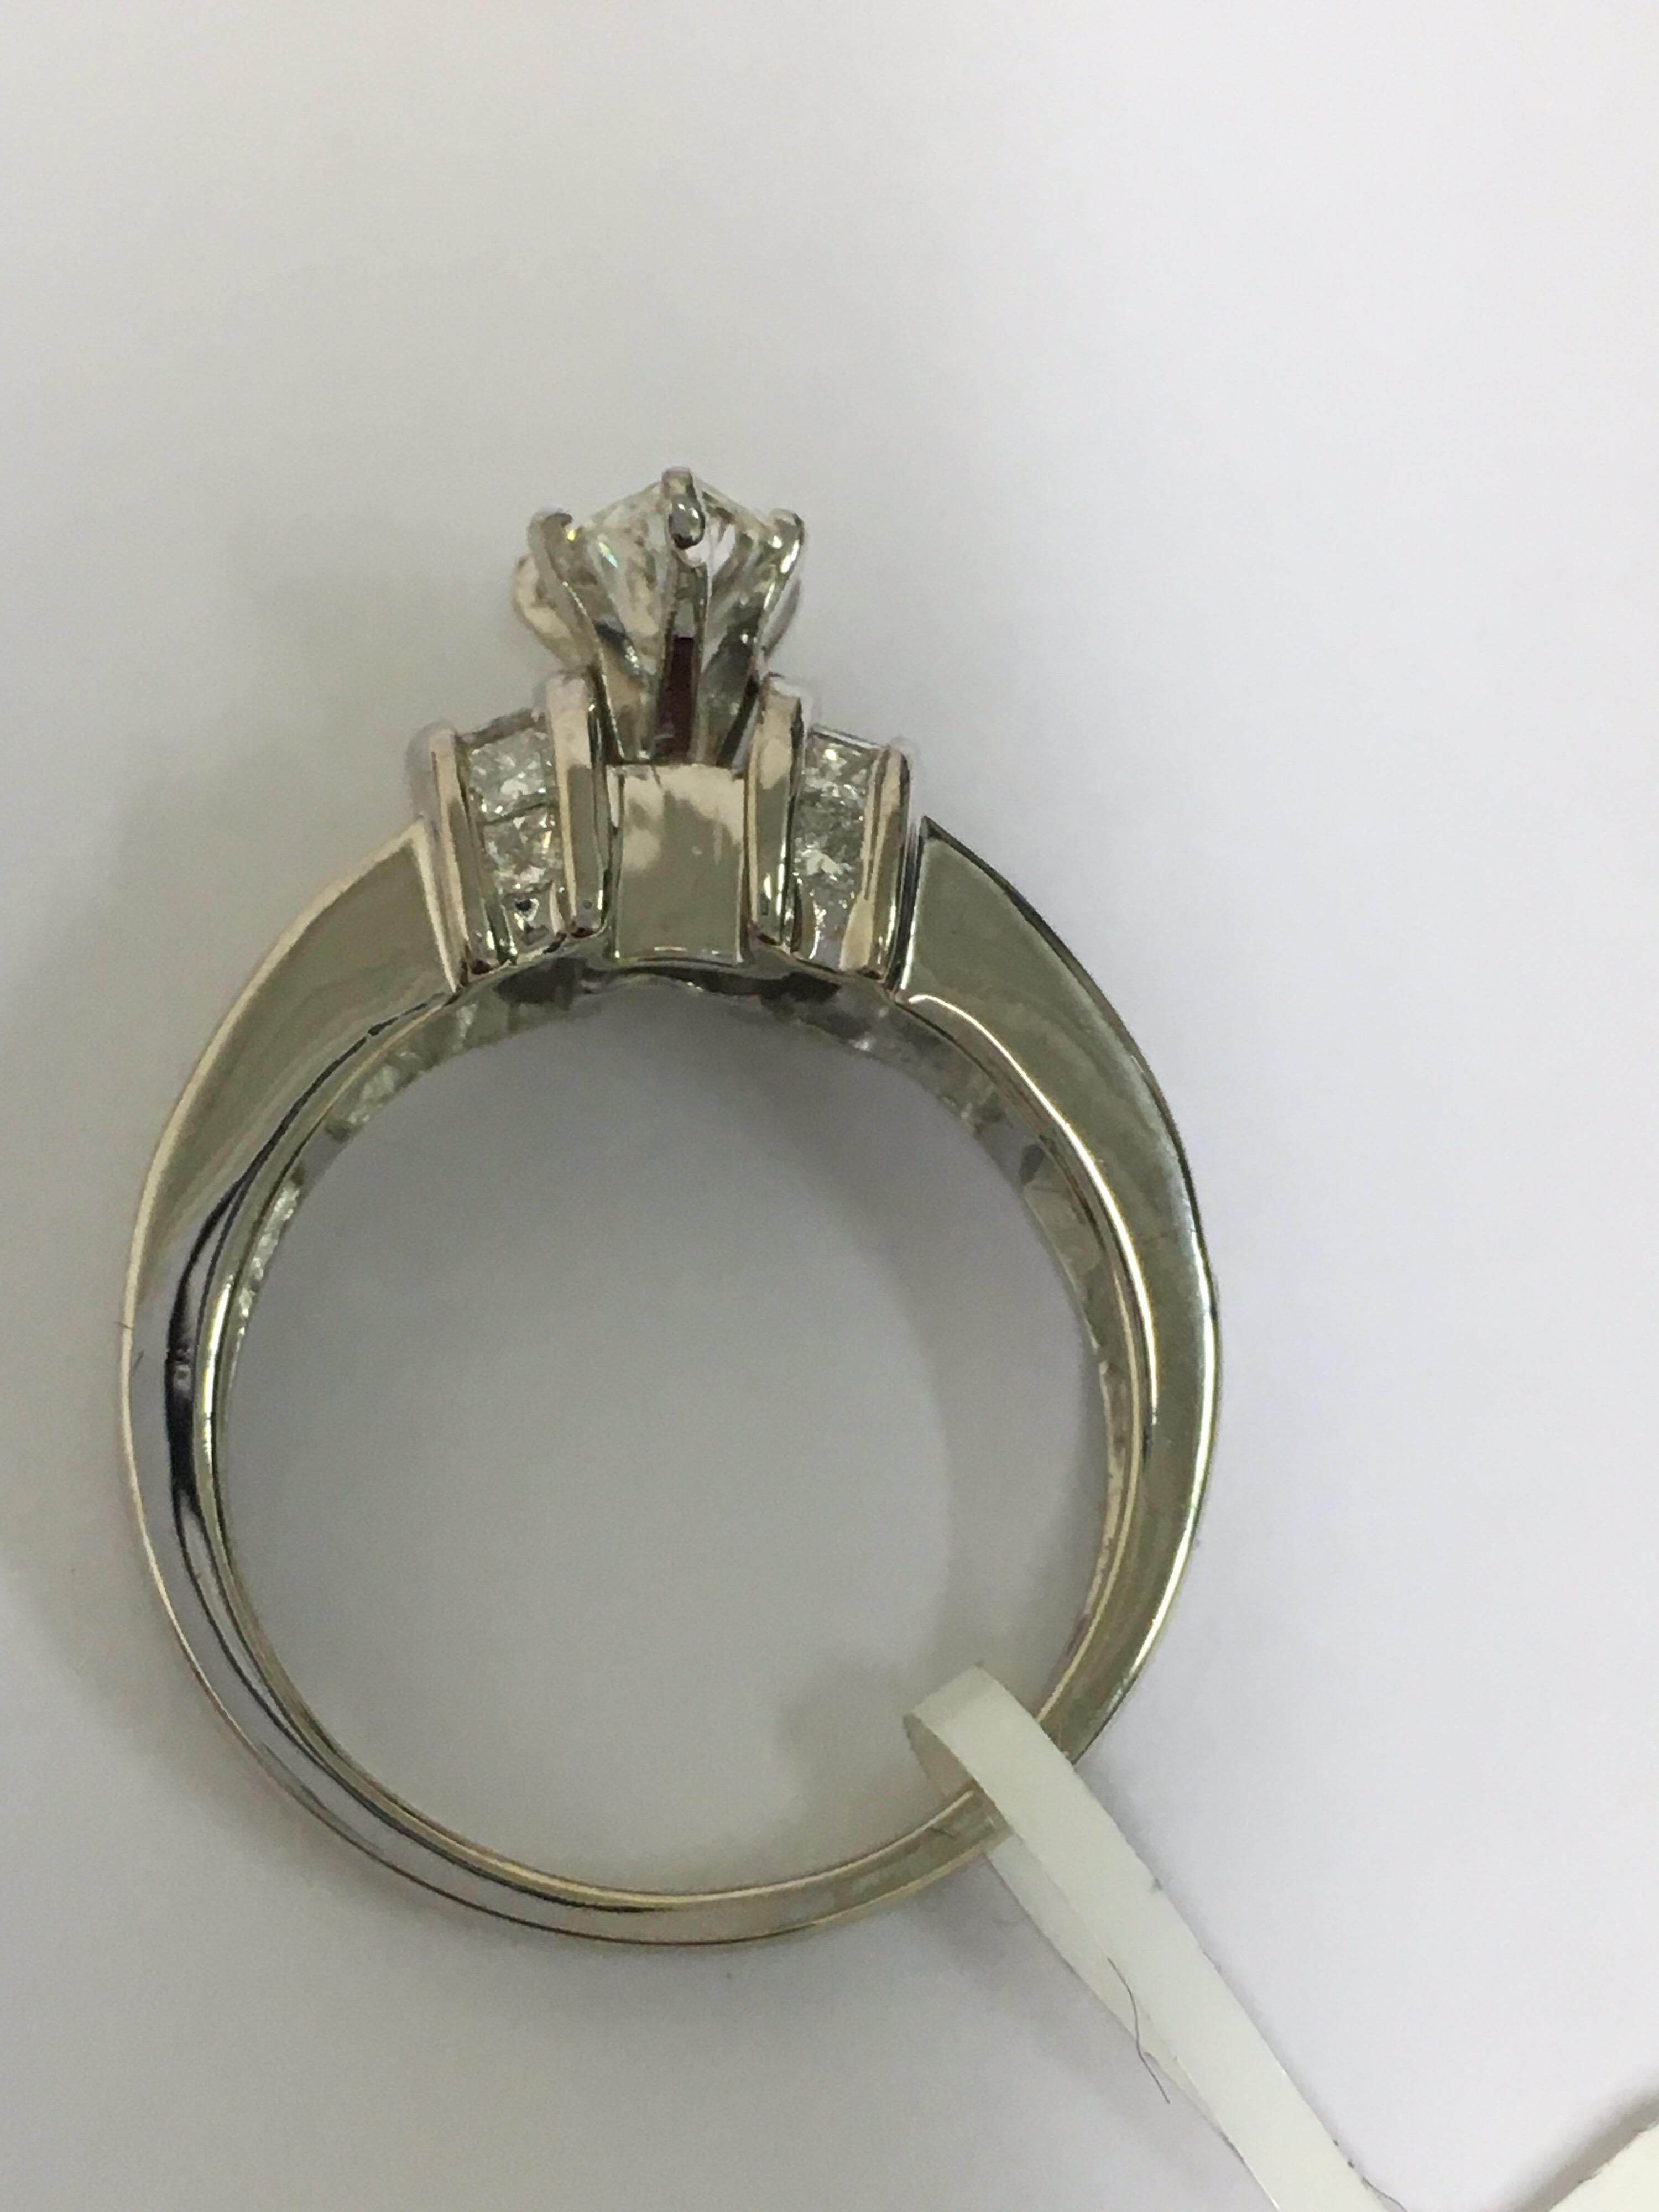 Marquise Diamonds with other diamonds set in 14 Karat White Gold.Center Marquise Diamond is 0.83 Carat and additional approx  1.17 Carat Diamonds which is princess cut and Baguette. Size of the ring is 7 but can be resized.